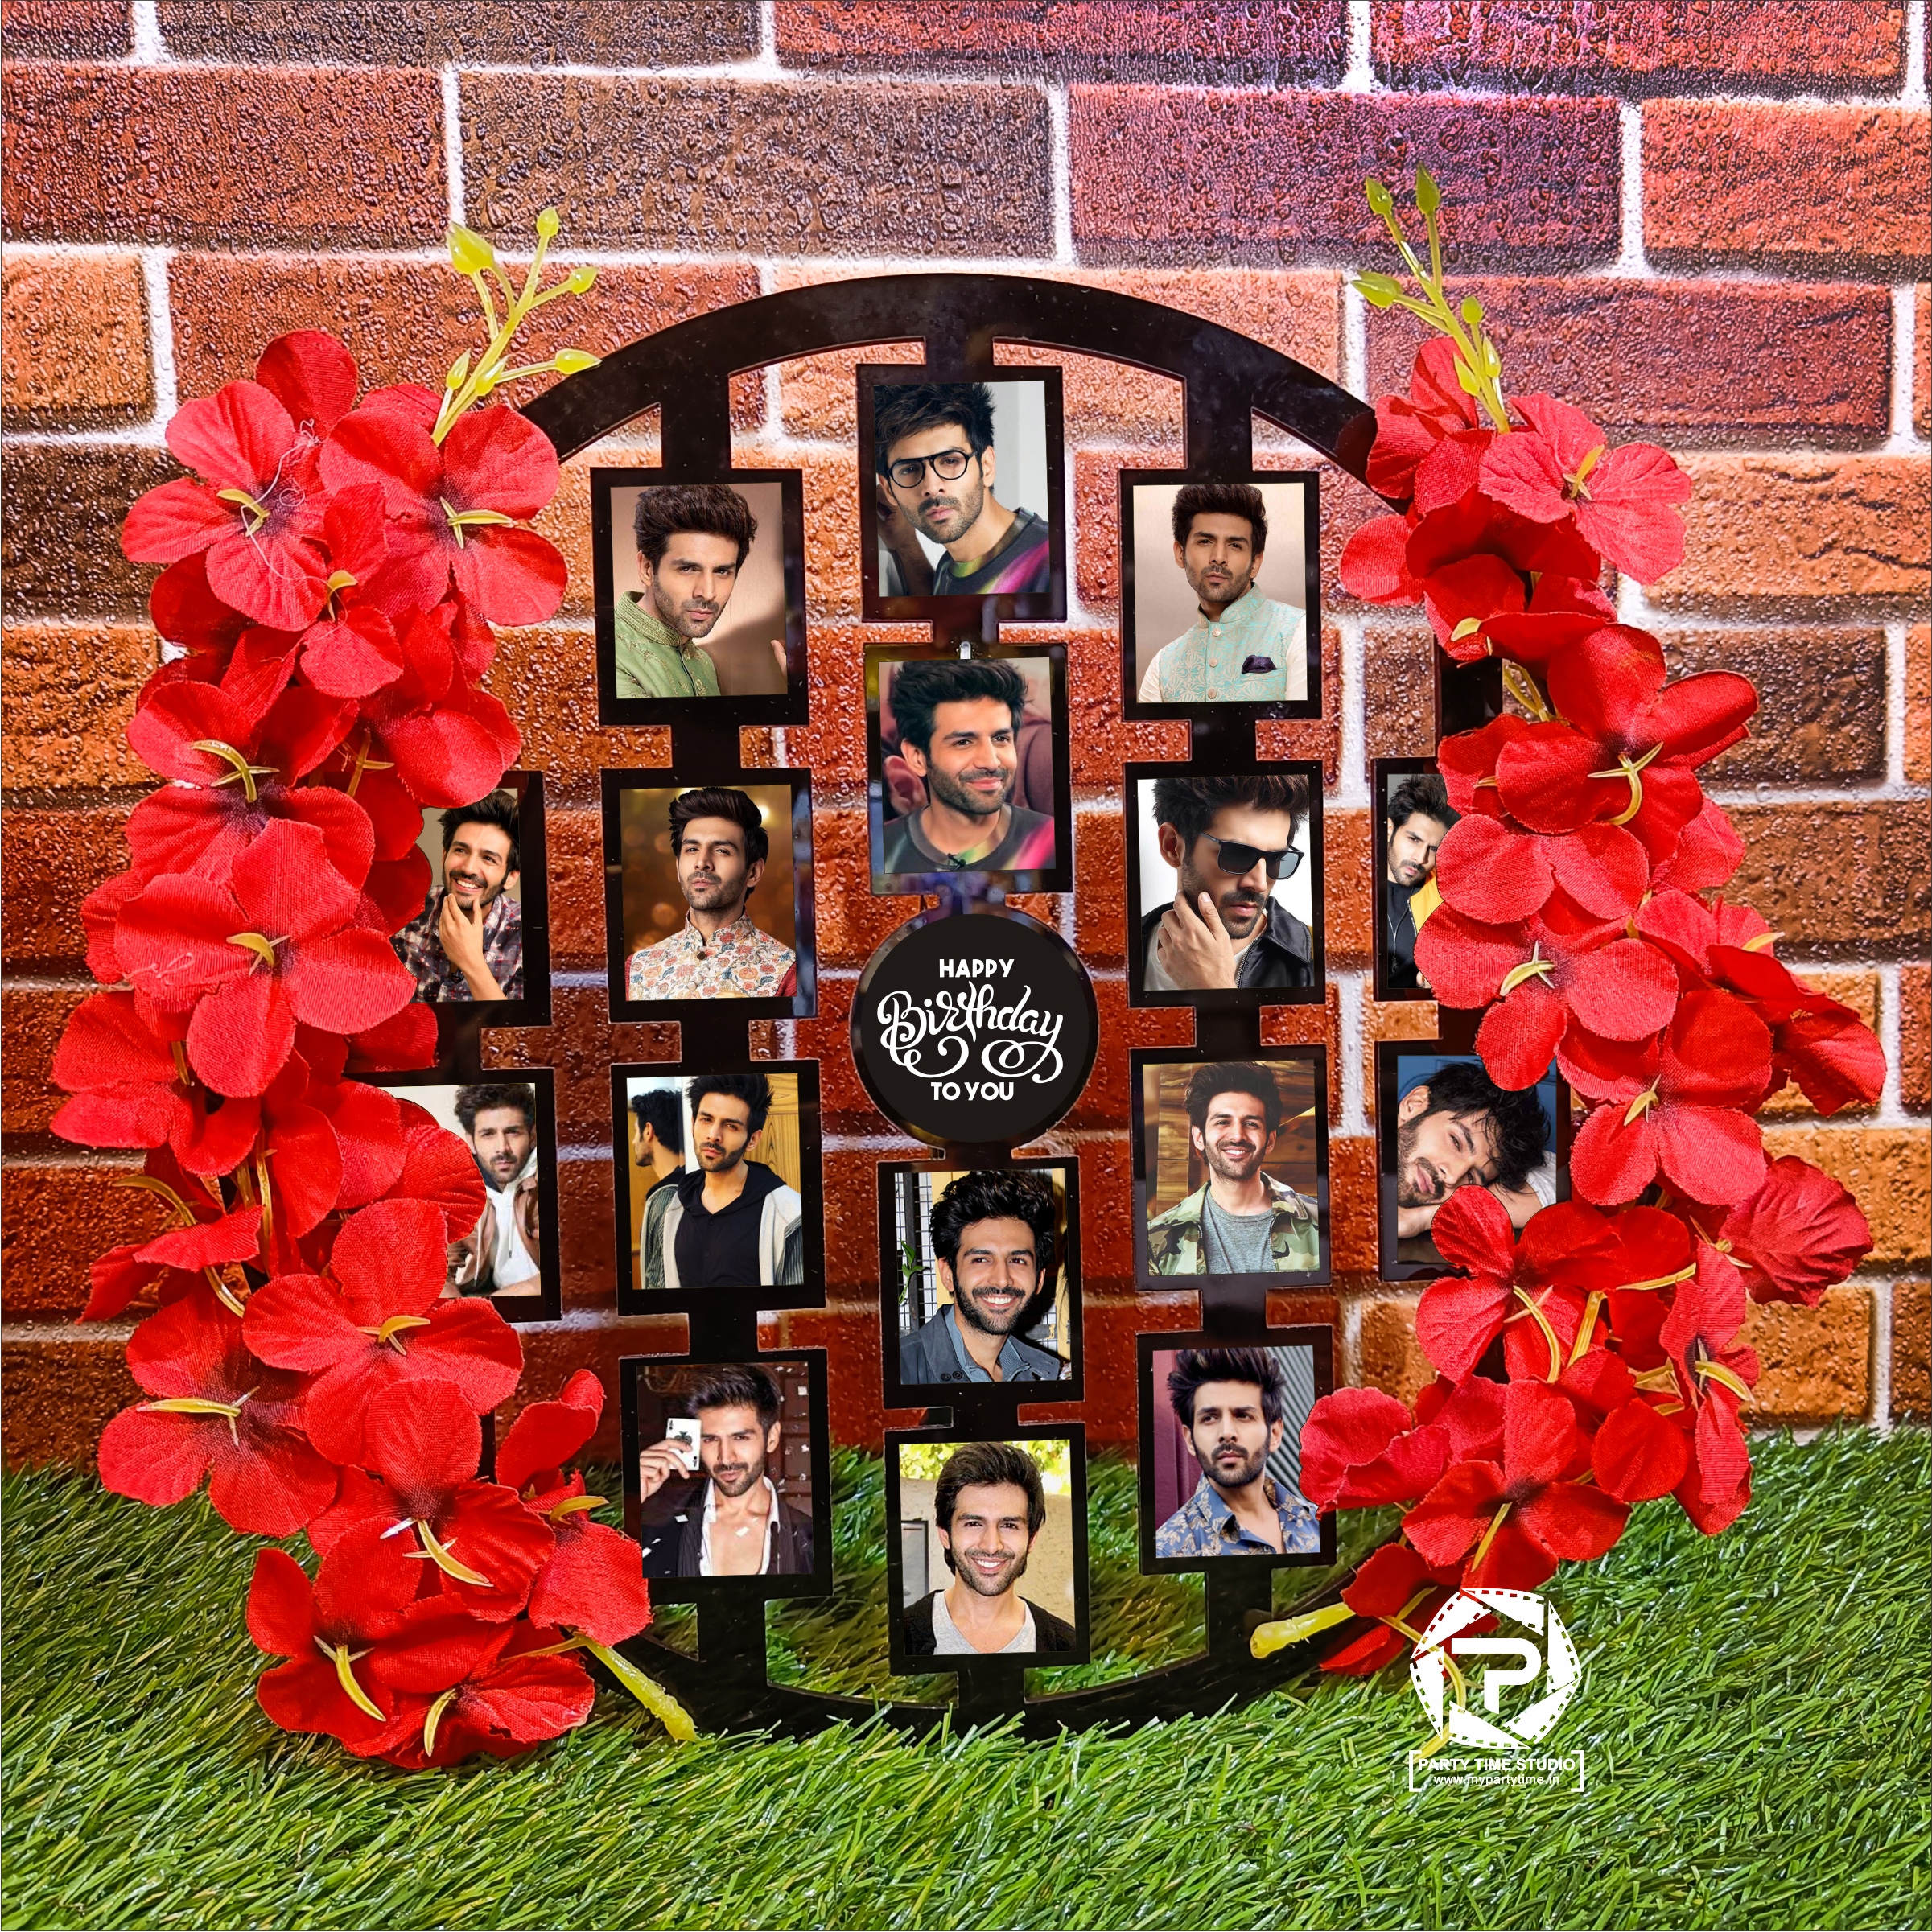 Personalized gifts are intended to be loved and treasured. Just like this personalized circle wall Hanging frame . Relive the old and make new memories by putting your favorite pictures. It can be a great gift for any occasion such as birthday, anniversary, house warming, etc. Shop now! Material : 4mm Acrylic & Wooden Print with Plastic Flowers Size : 12×12 Inches